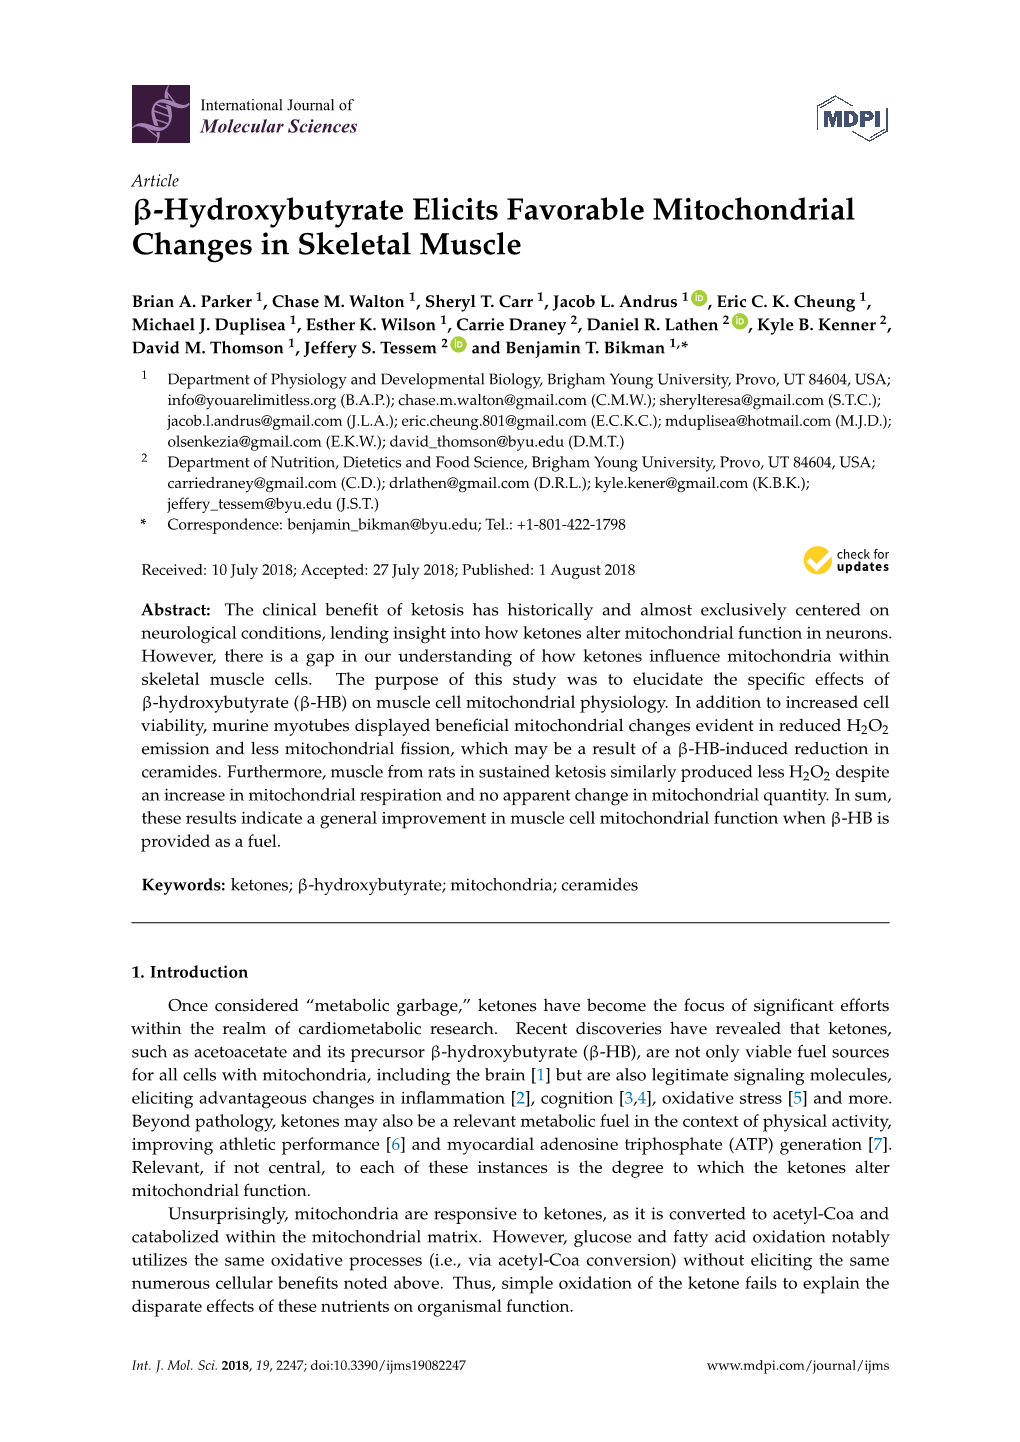 Hydroxybutyrate Elicits Favorable Mitochondrial Changes in Skeletal Muscle